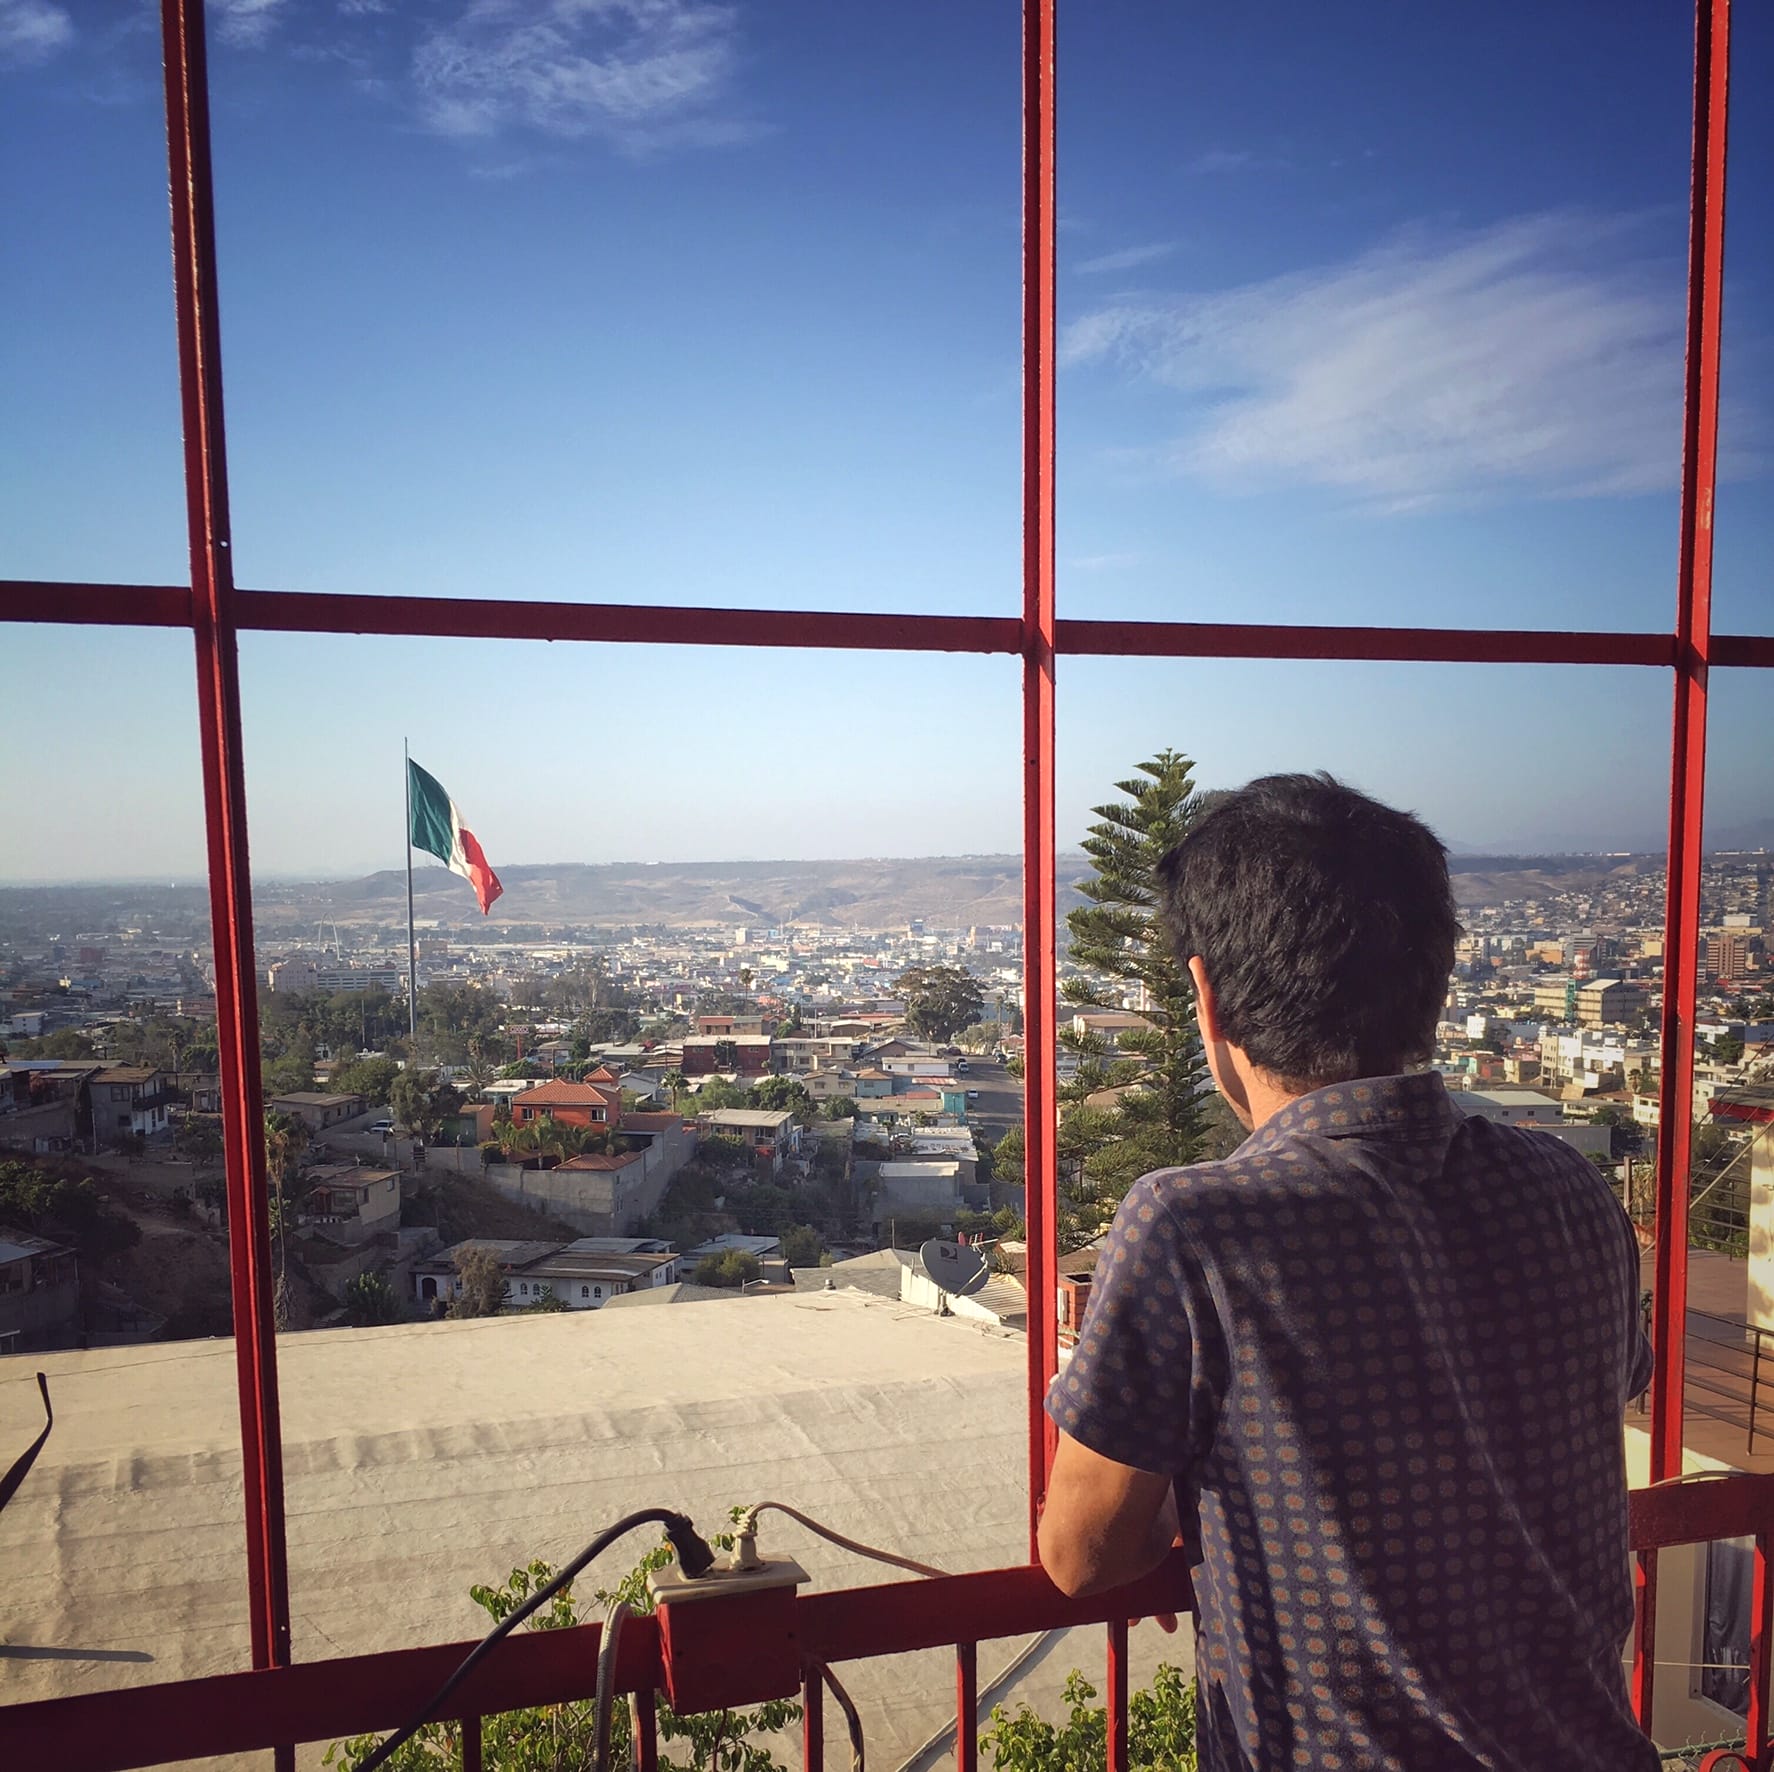 Shinpei Takeda looking out over Tijuana from his balcony. Photo by Chi Essary